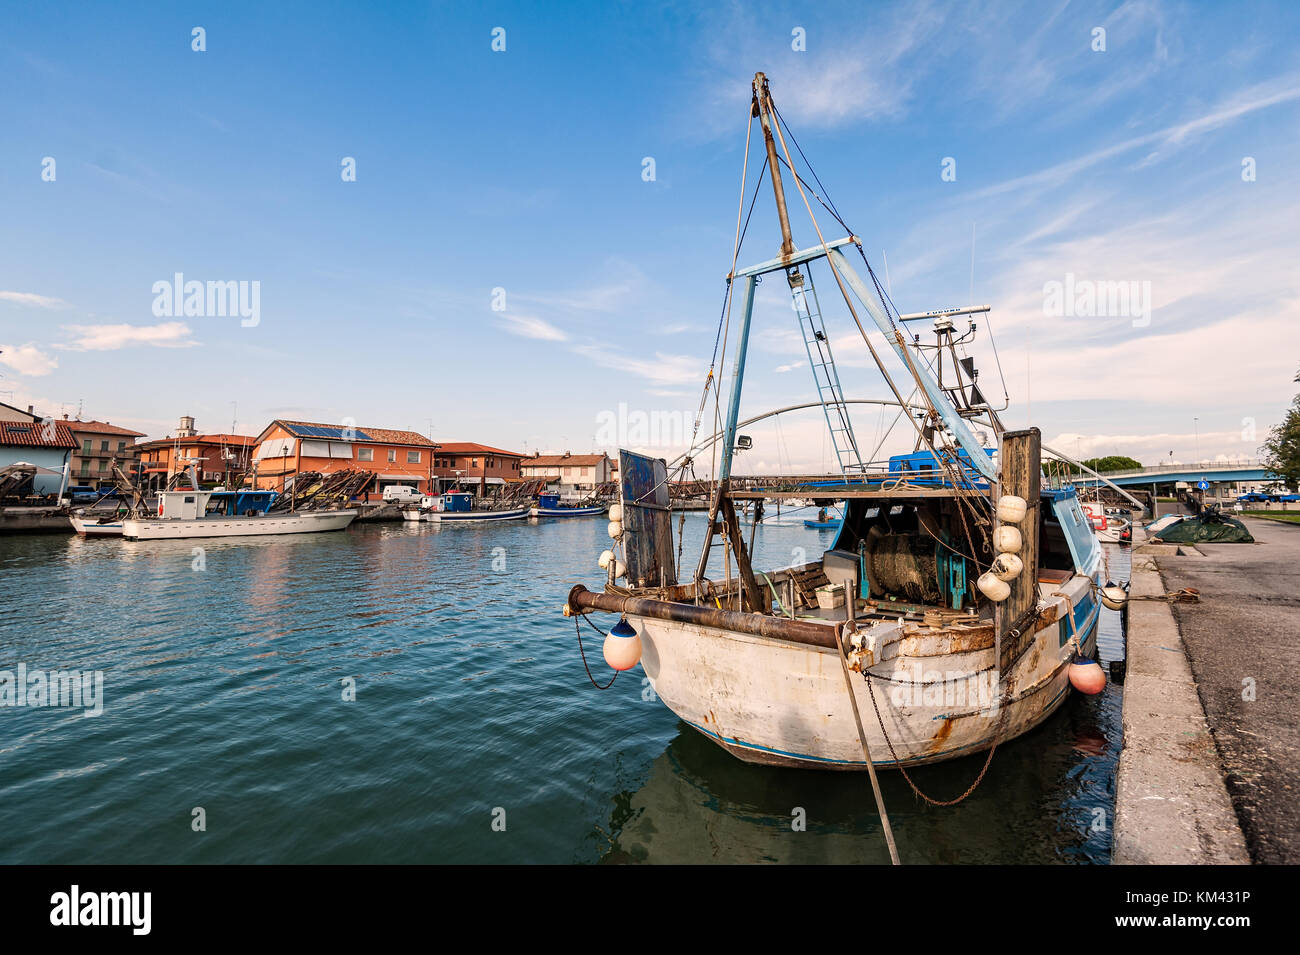 Fishing boats moored in the harbor. Stock Photo